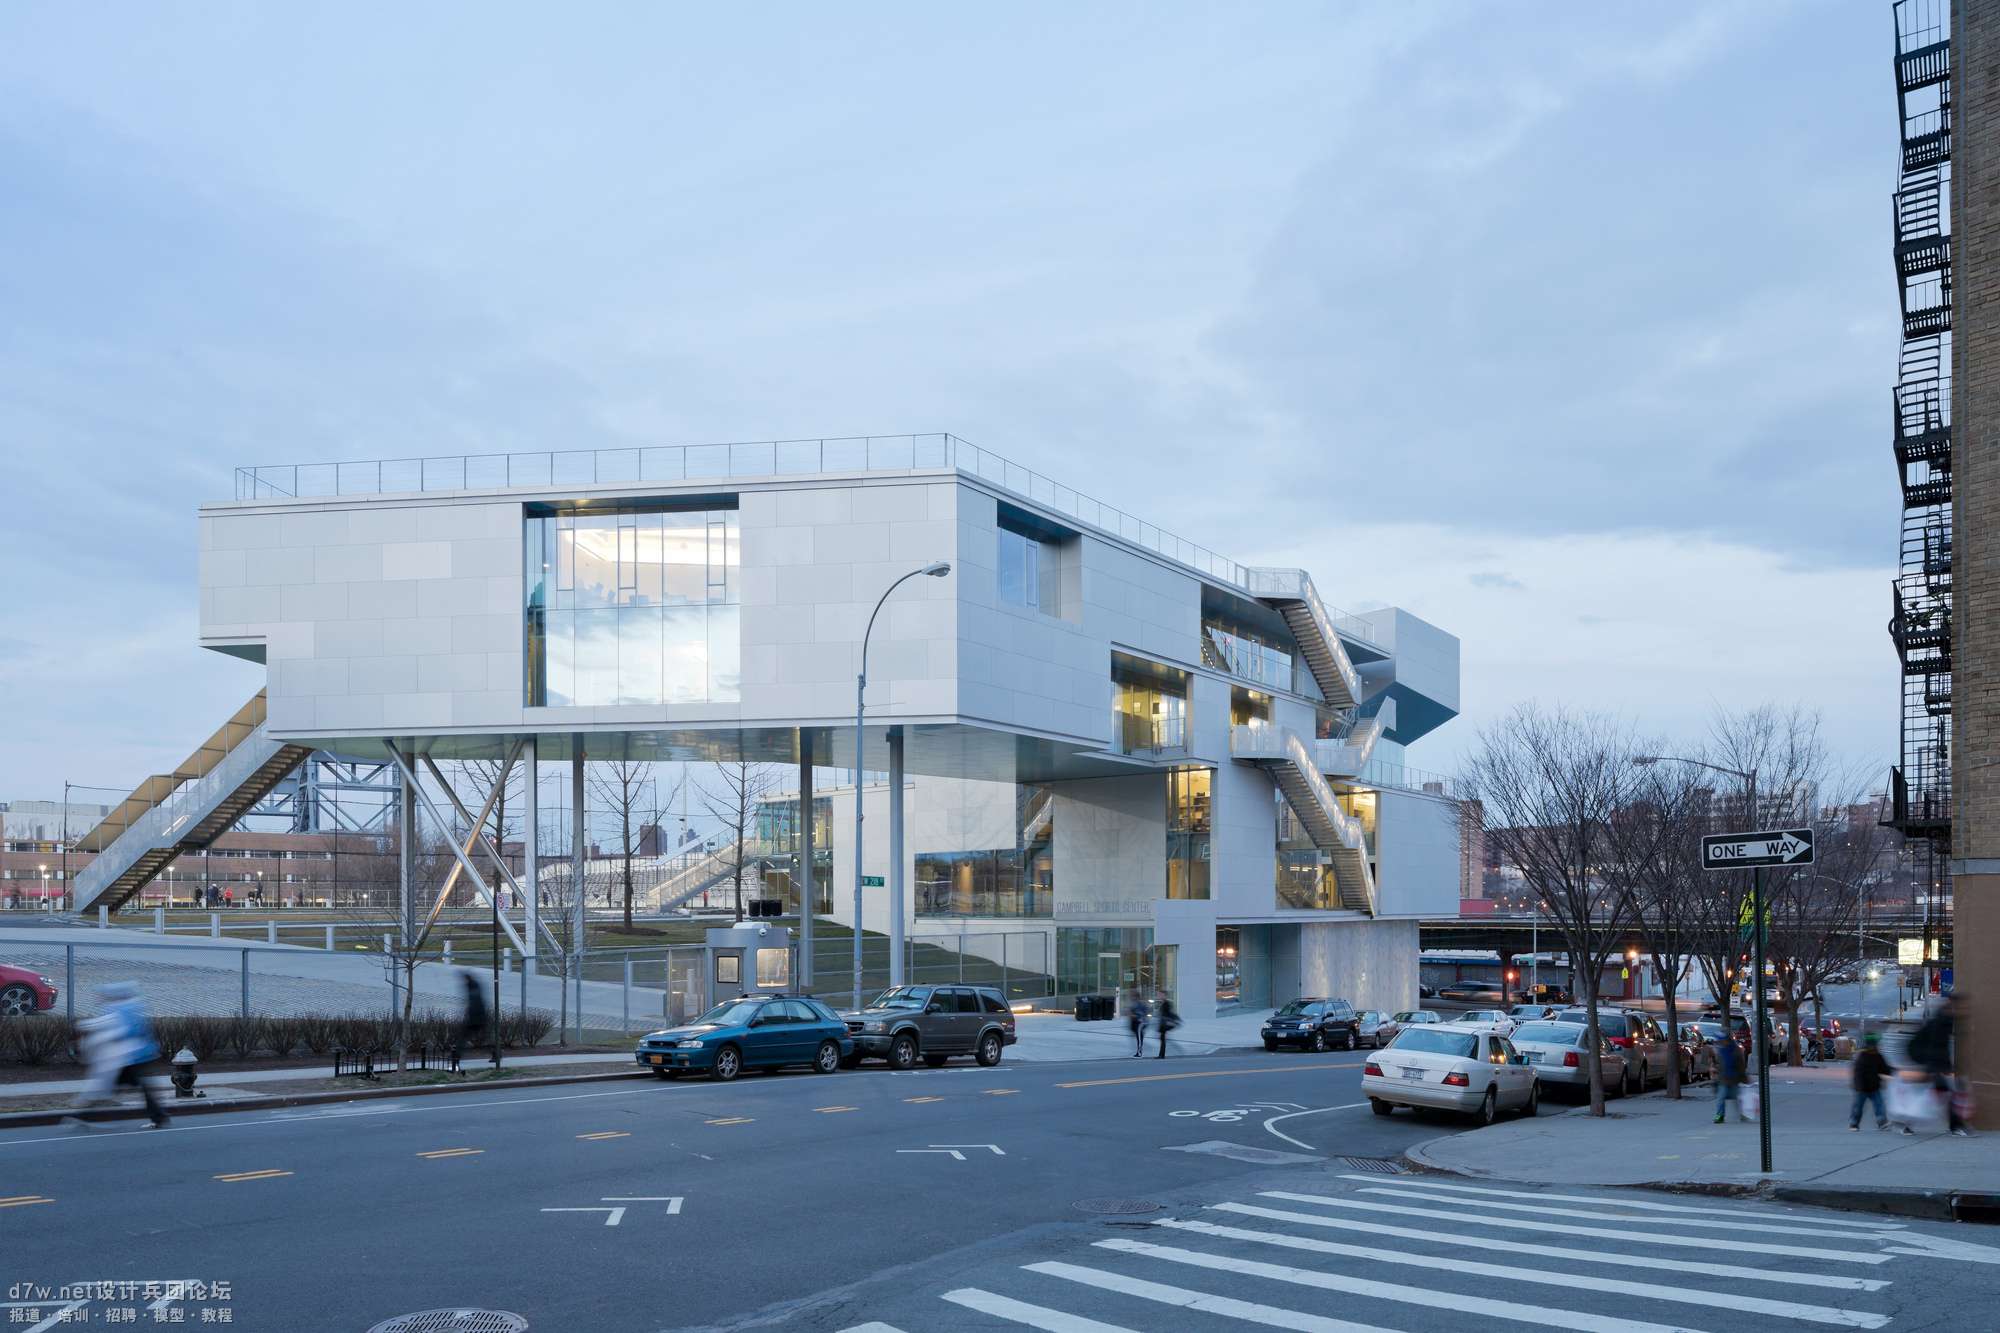 518bccf1b3fc4bf34d000016_campbell-sports-center-steven-holl-architects_campbell_.jpg